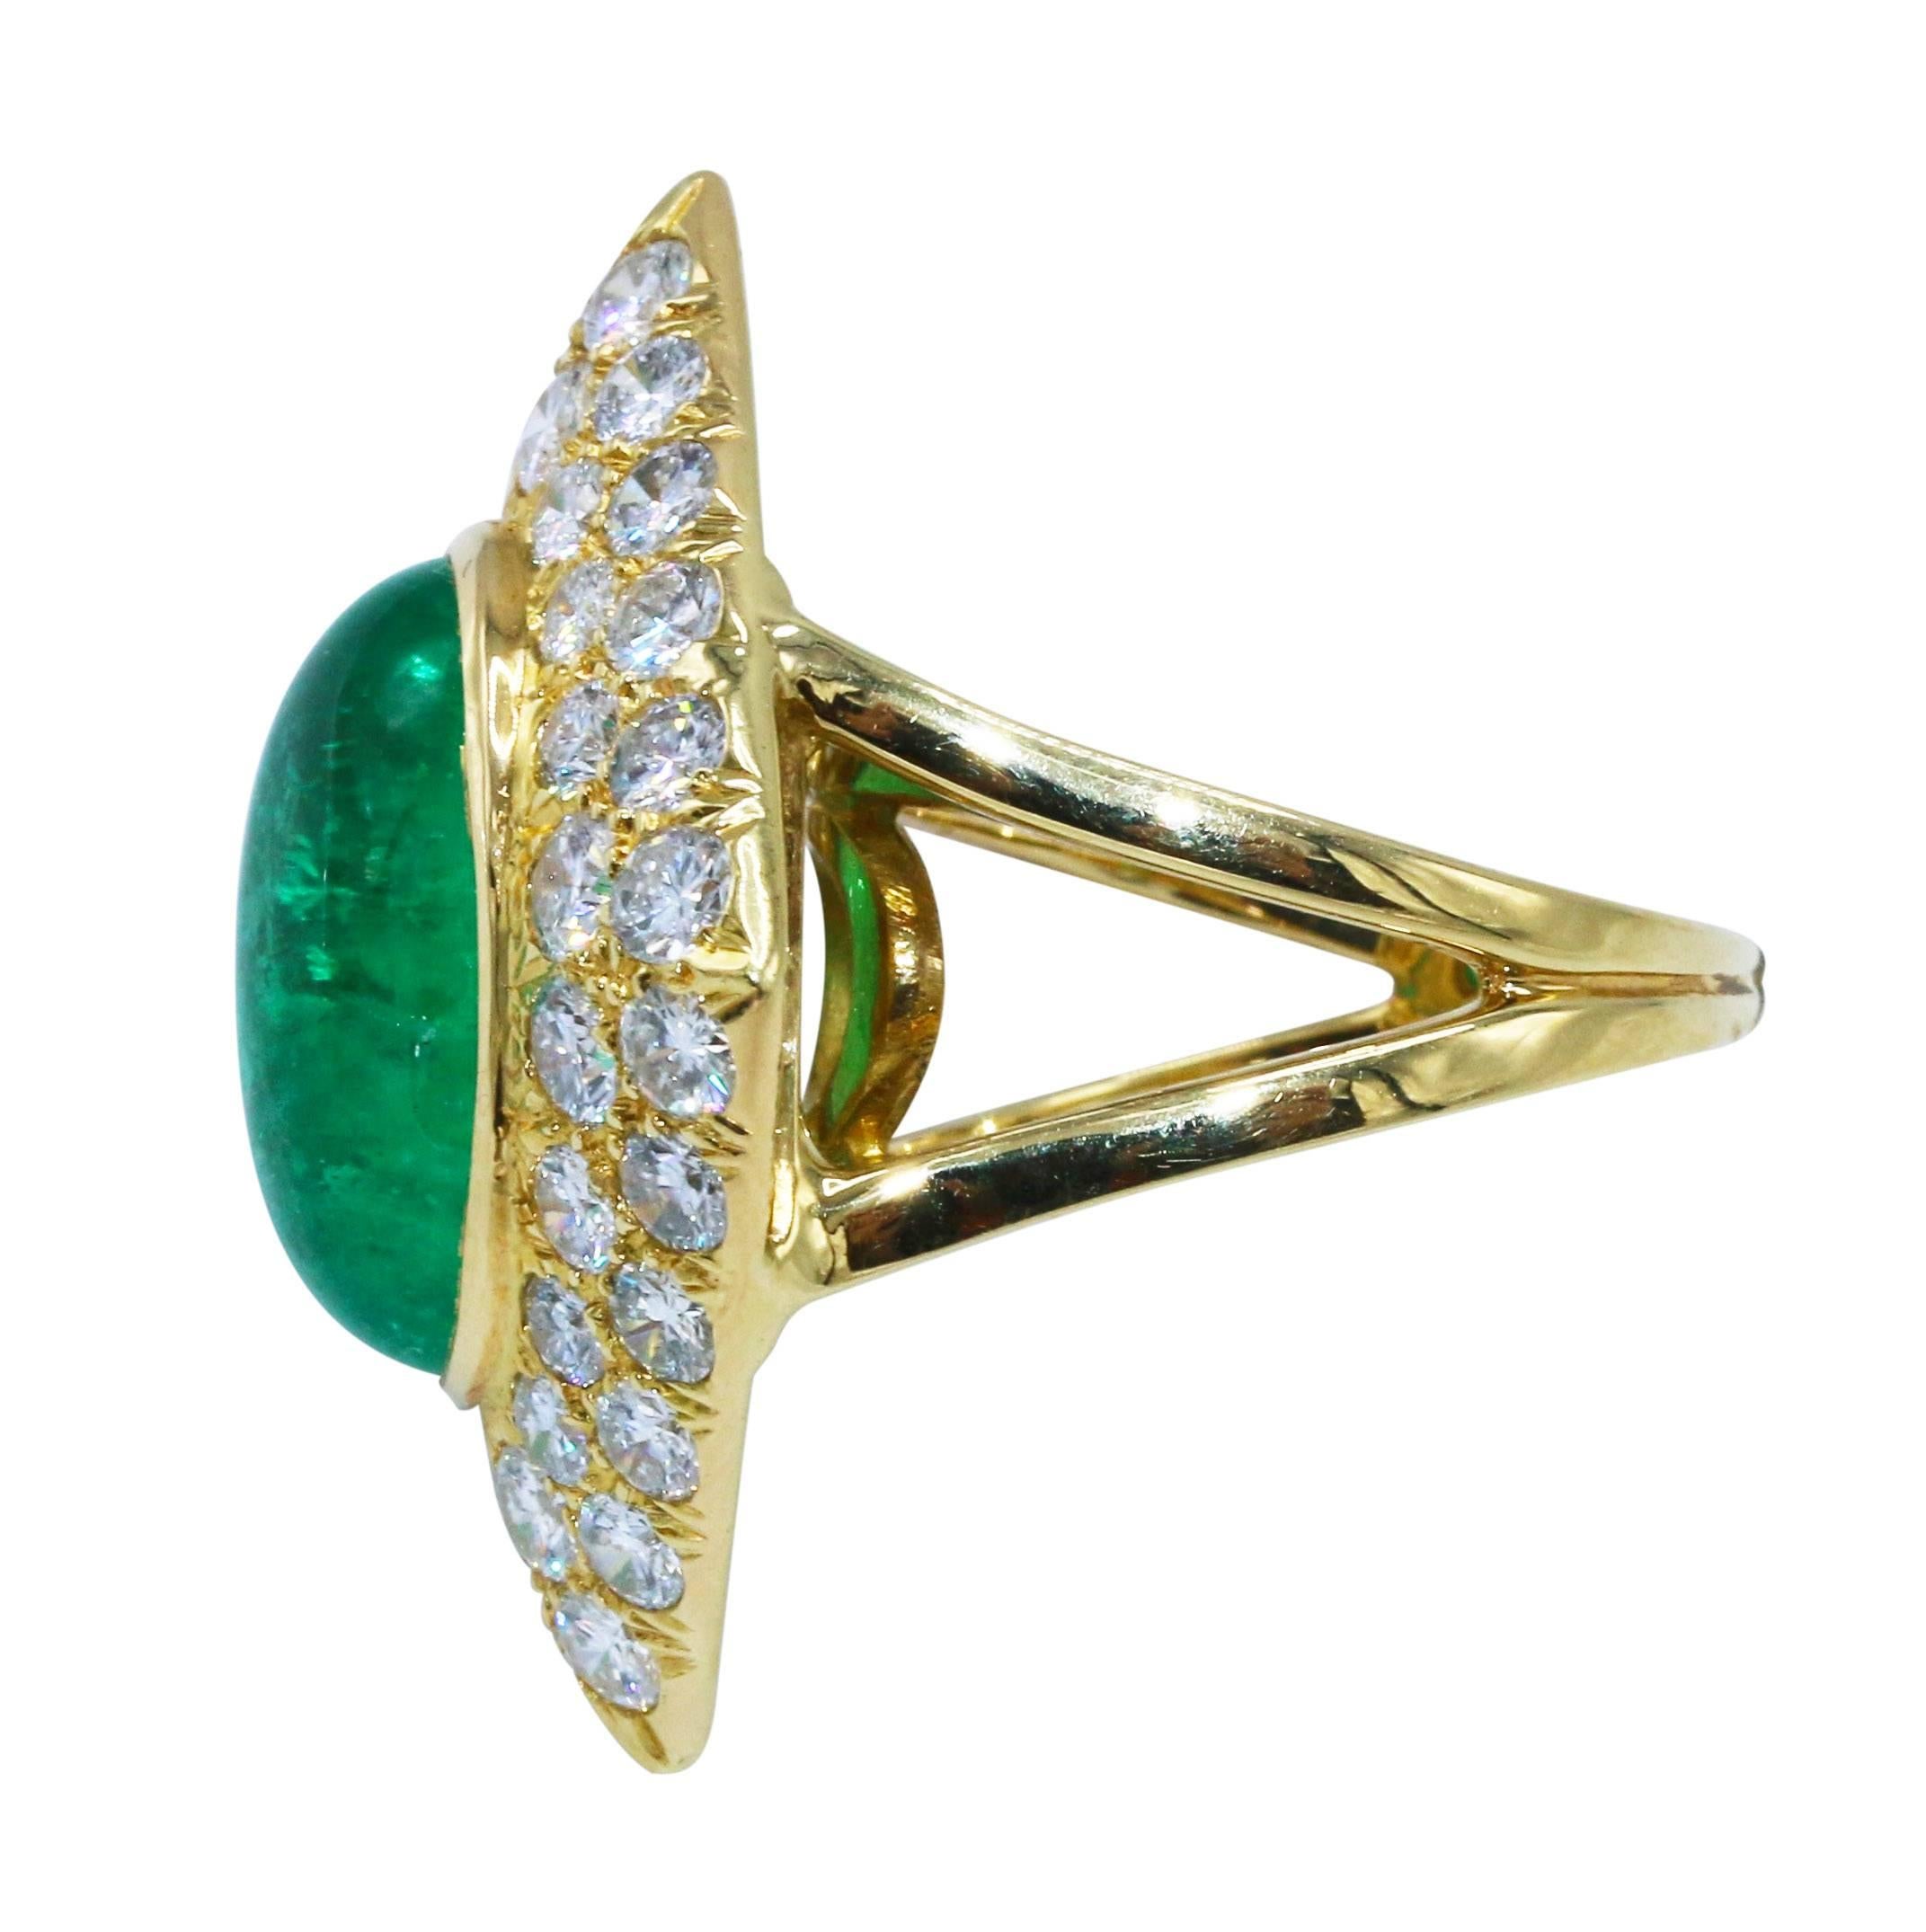 18 karat yellow gold, emerald and diamond cocktail ring, set in the center with a cabochon emerald weighing approximately 10.00 carats, within a diamond-shaped plaque set with round diamonds weighing approximately 1.20 carats, gross weight 11.3